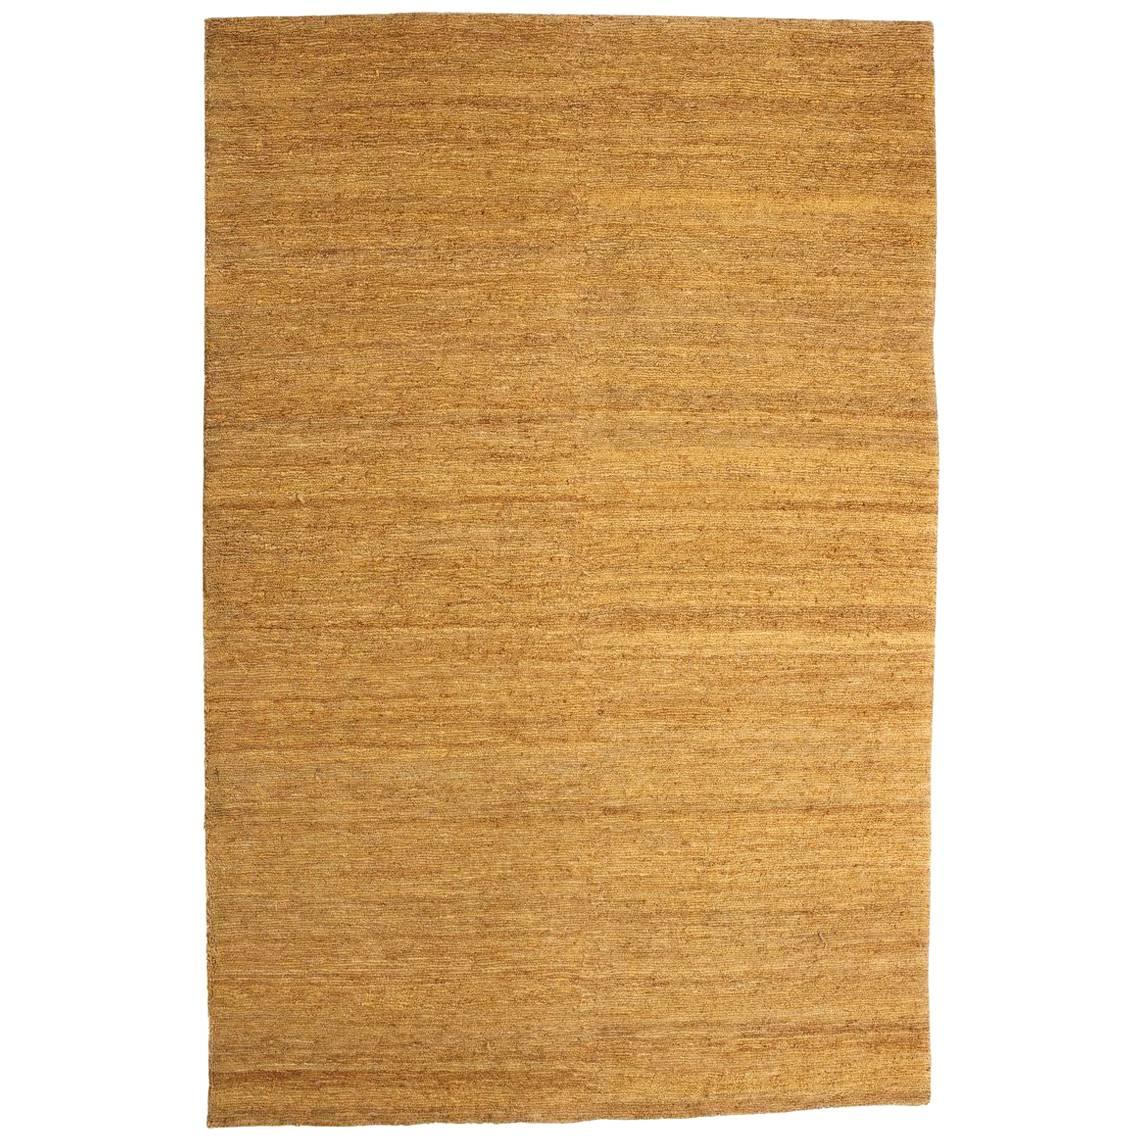  Ochre Earth Rug in Hand-Knotted Jute by Nani Marquina & Ariadna Miquel, Medium